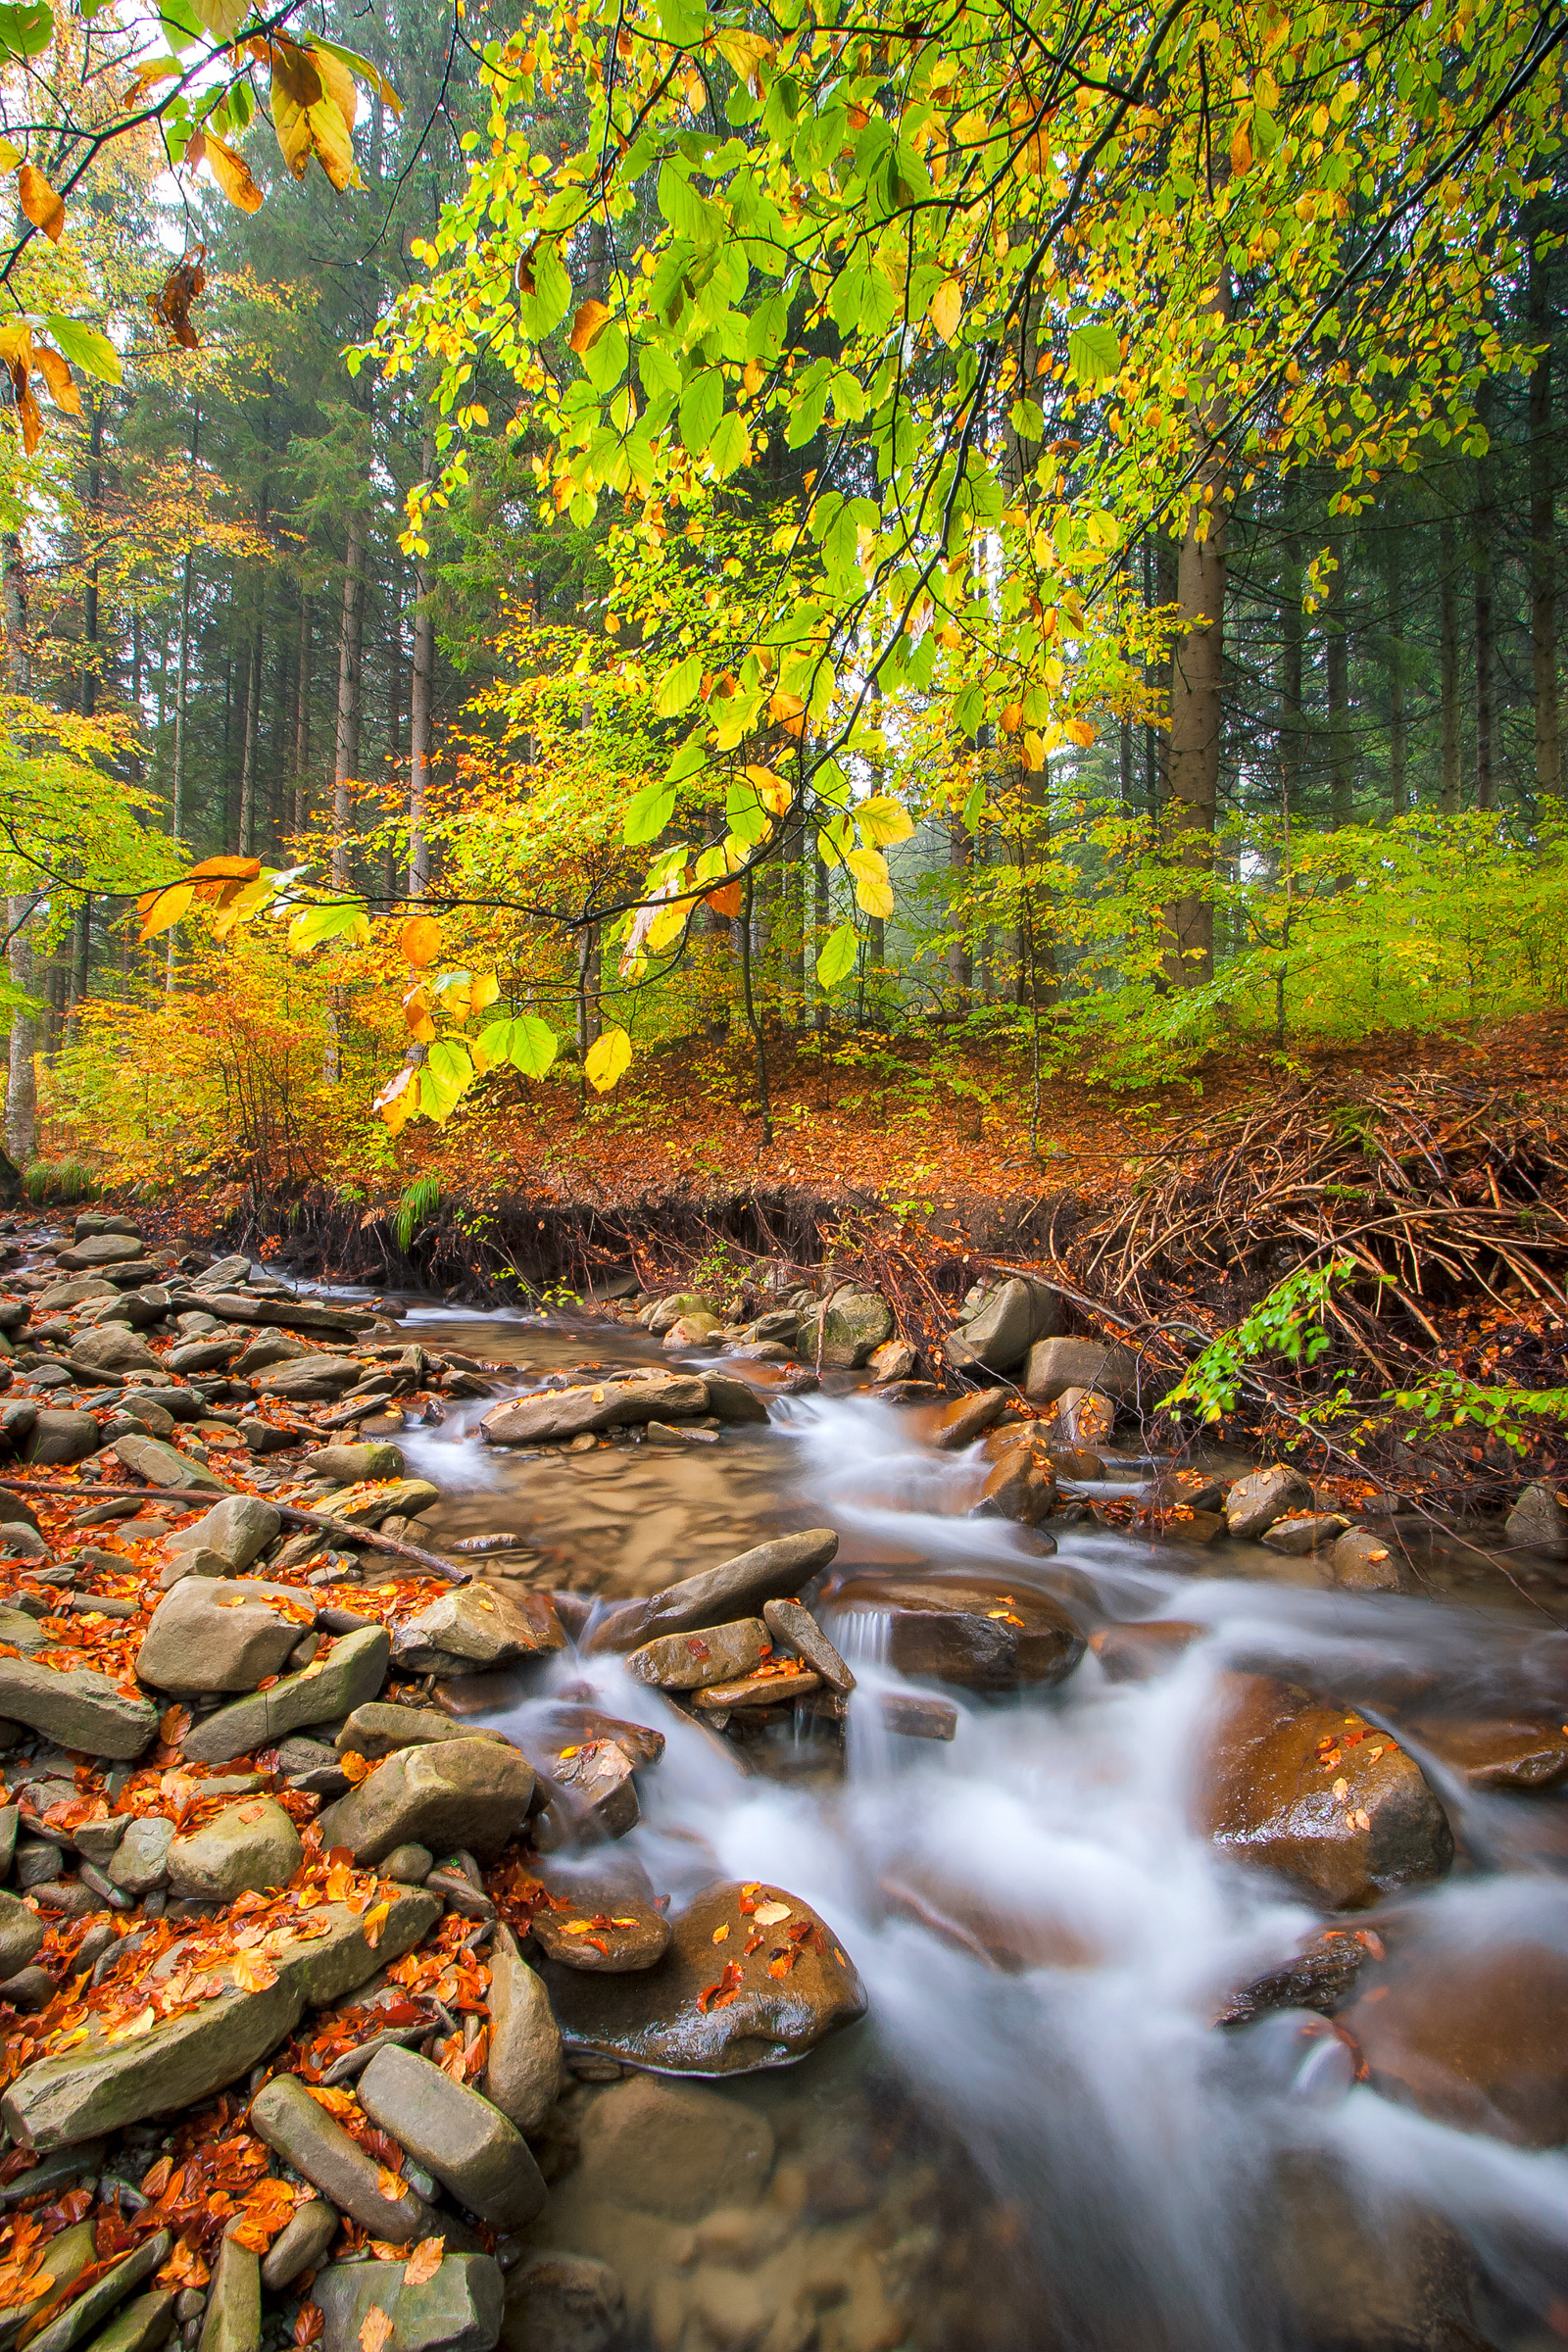 Autumn landscape with a shallow stream in the forest